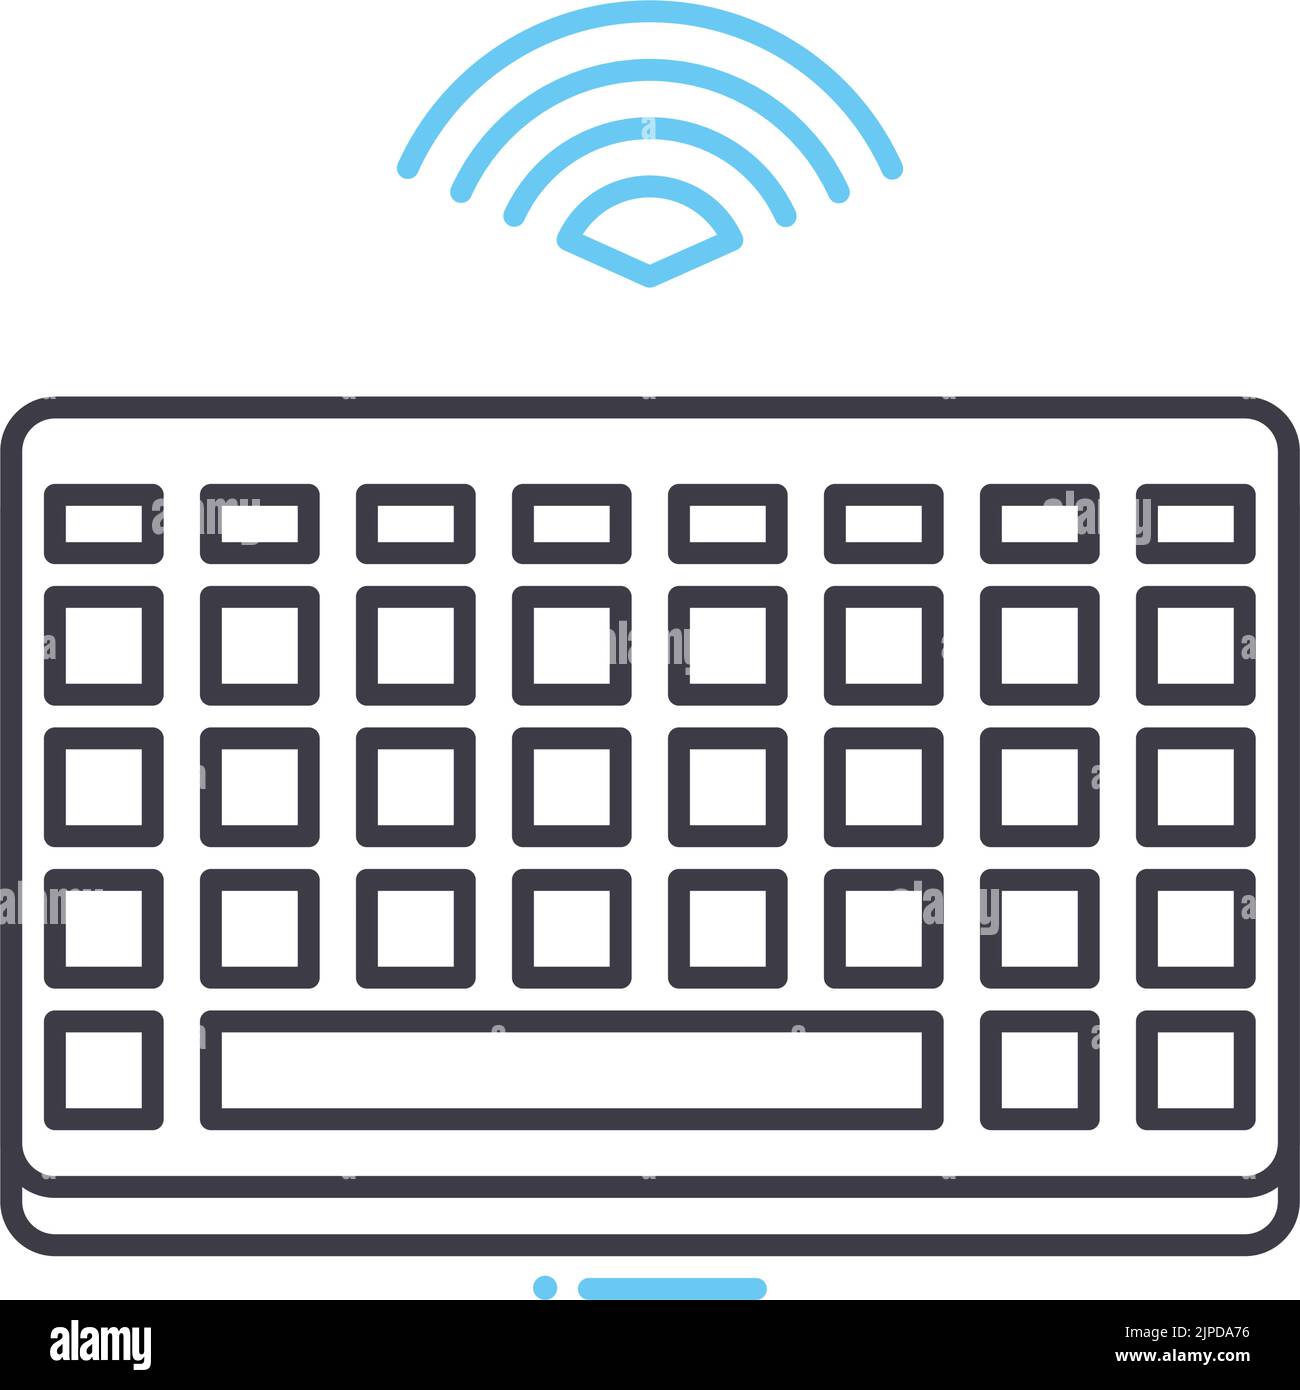 wreless keyboard line icon, outline symbol, vector illustration, concept sign Stock Vector